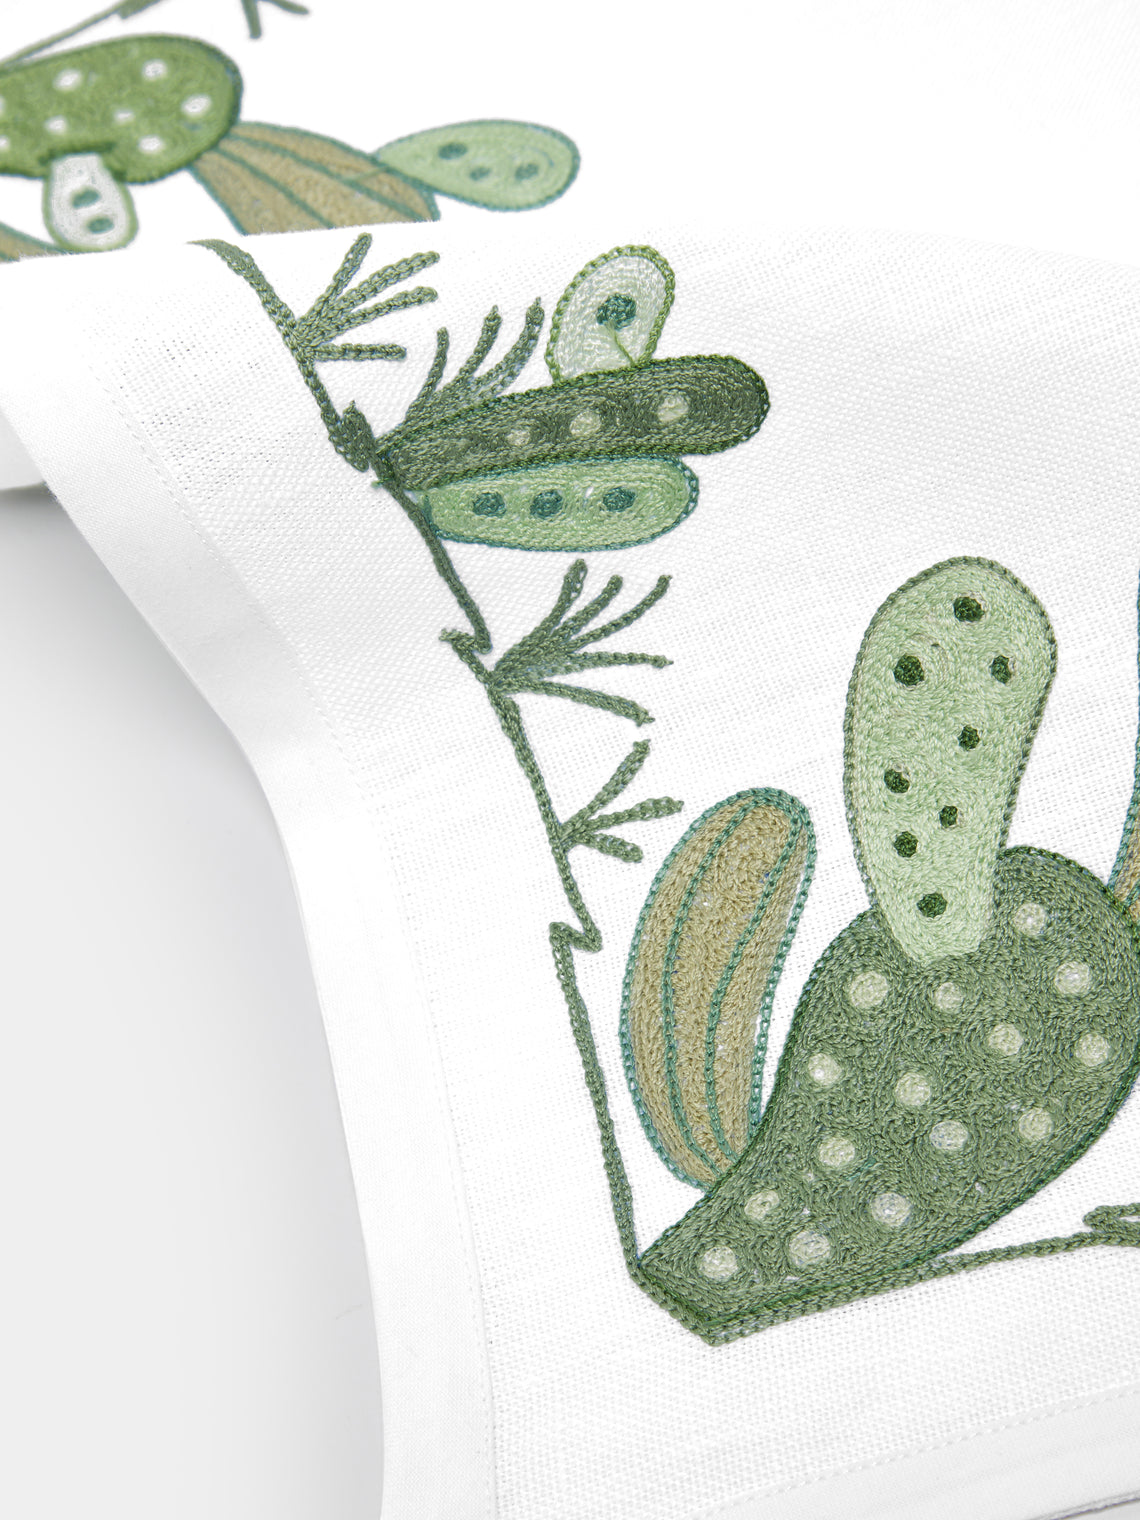 Loretta Caponi - Cactus Hand-Embroidered Linen Placemats and Napkins (Set of 2) -  - ABASK